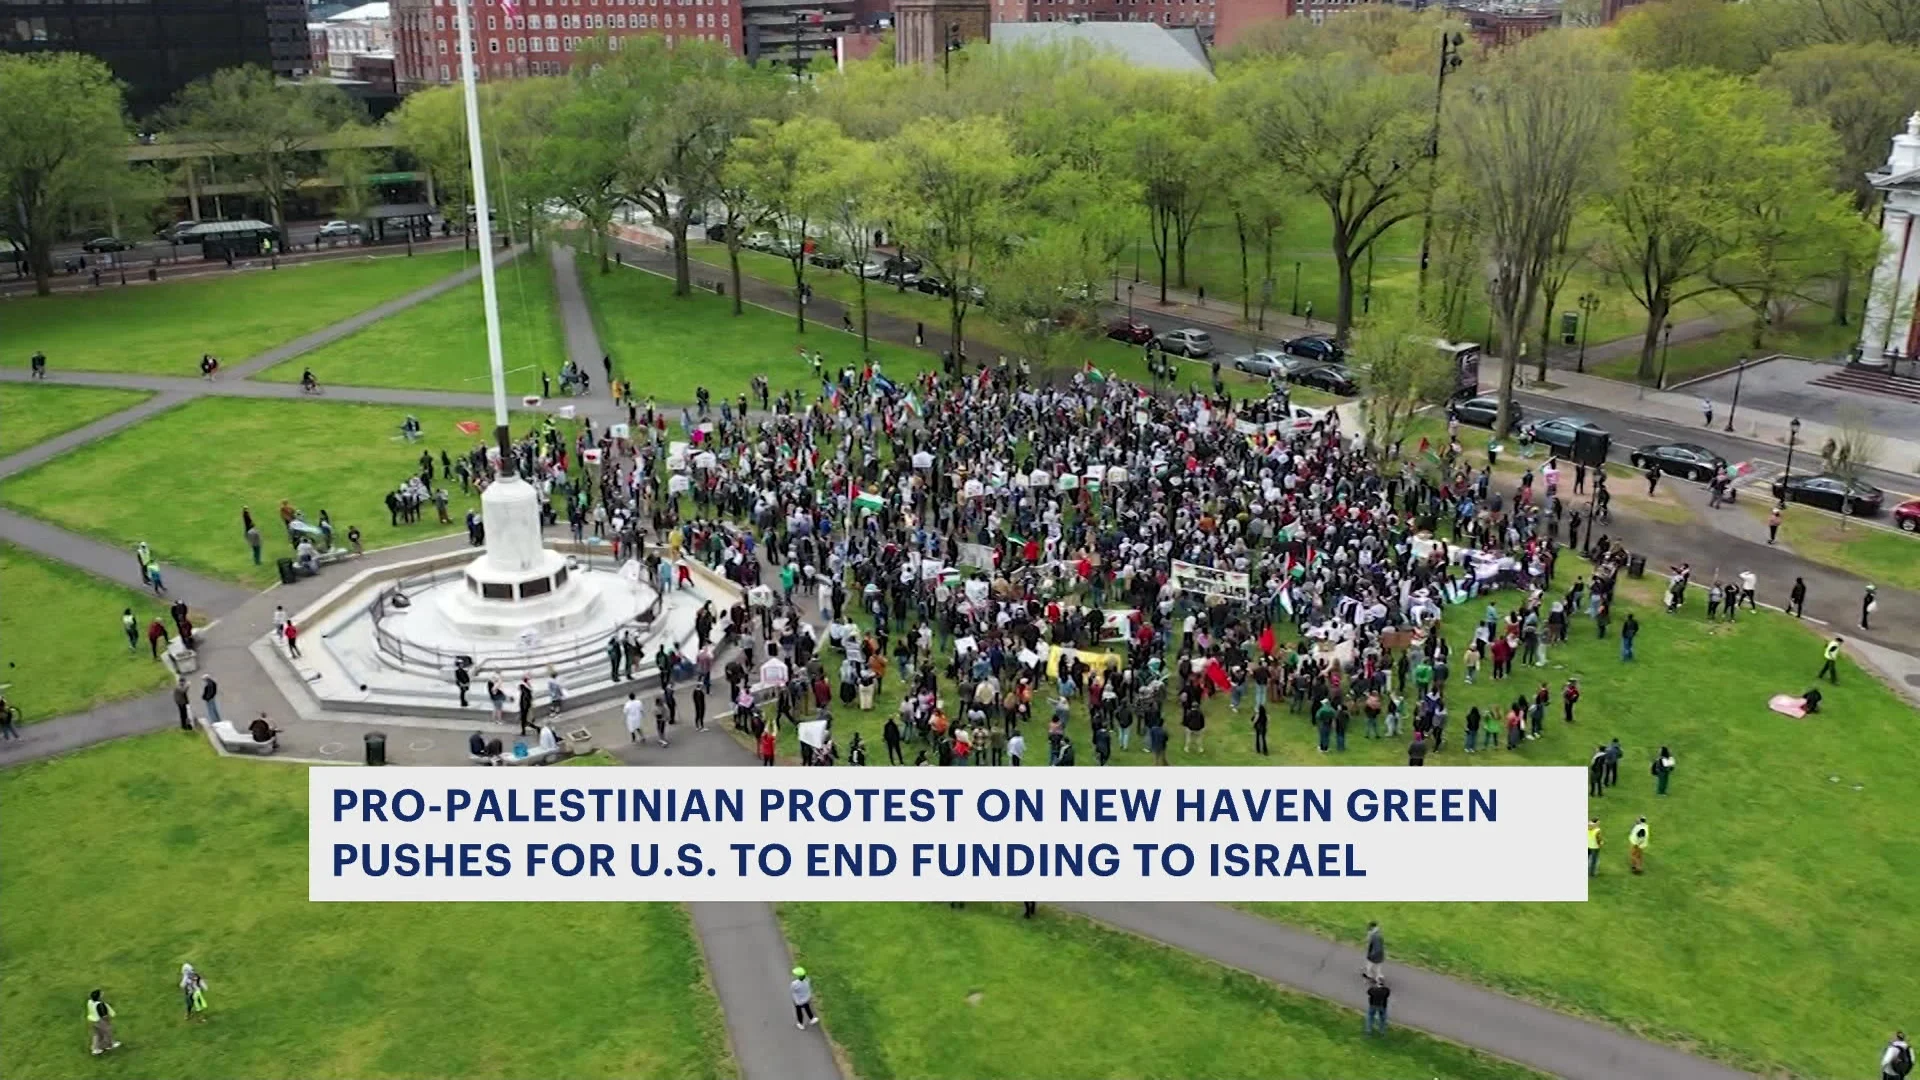 ​Thousands peacefully march in pro-Palestinian protest on New Haven Green